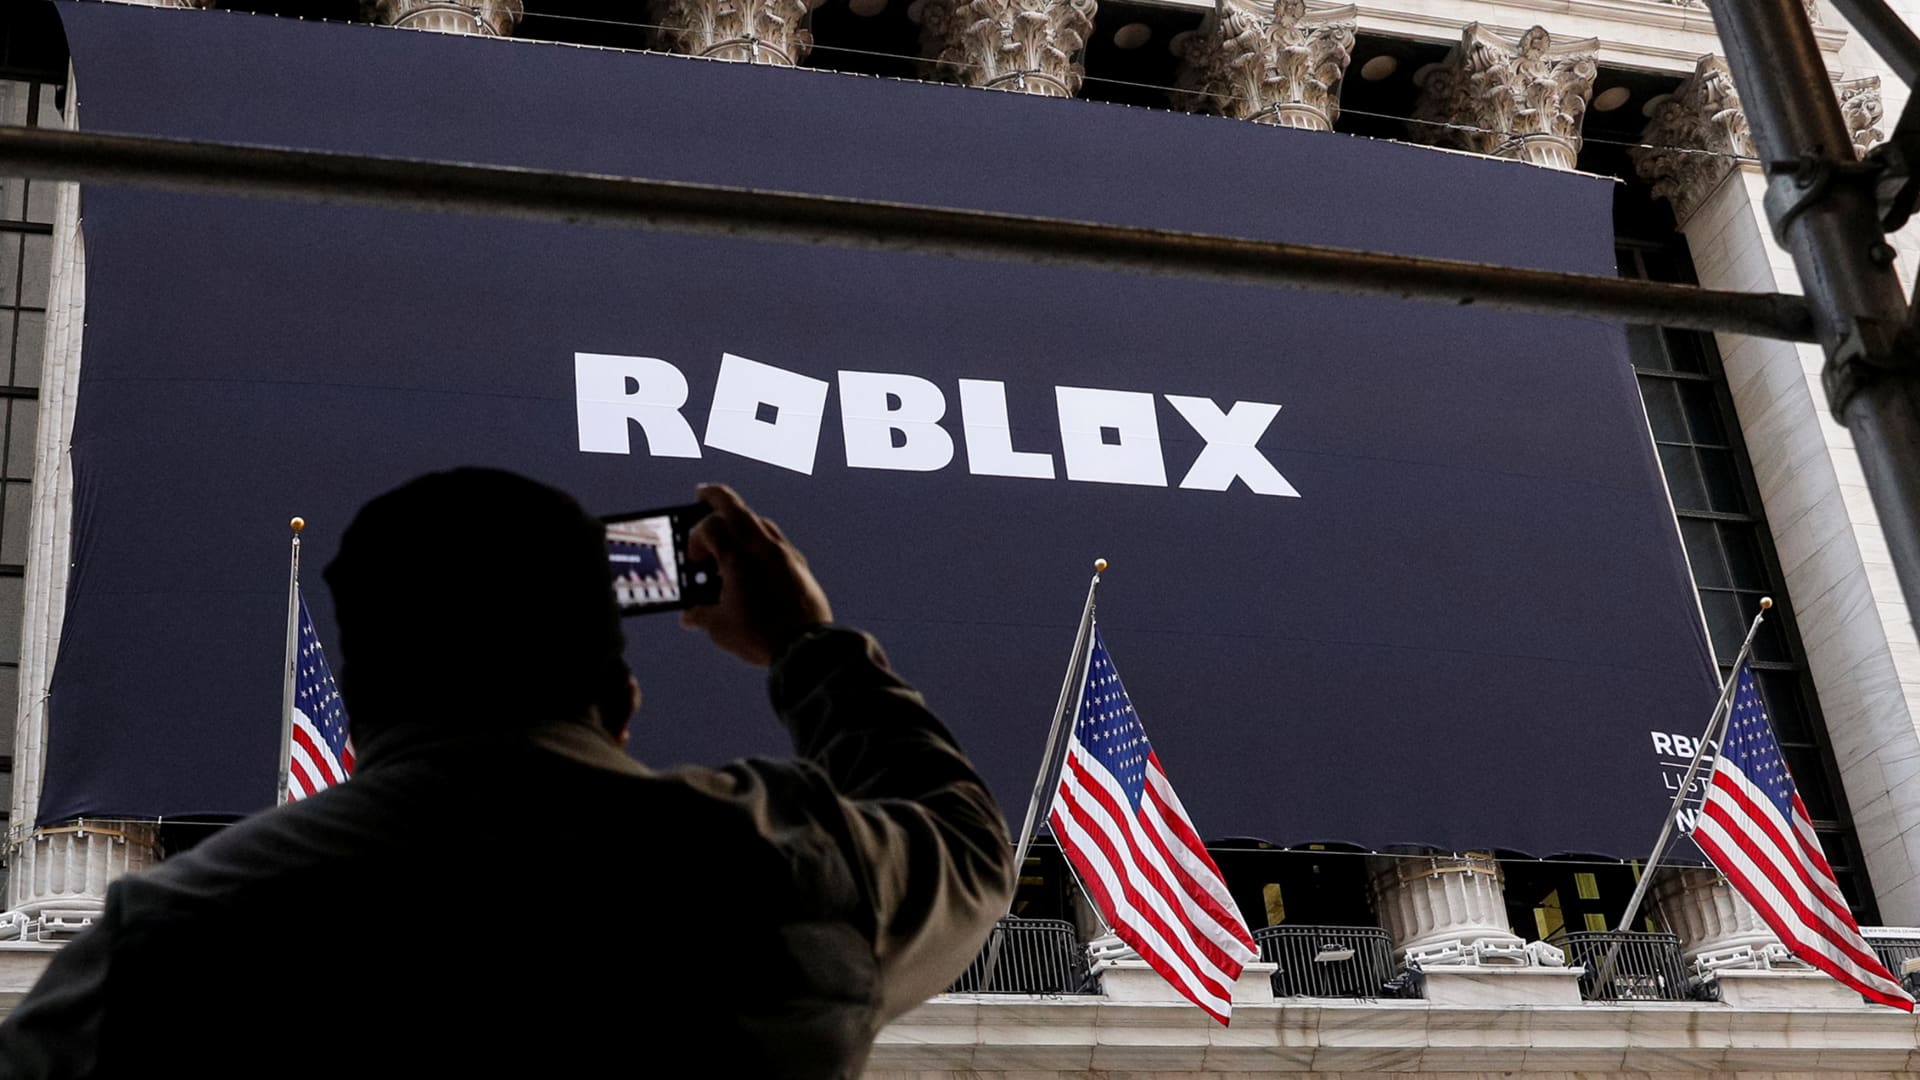 Roblox stock up after company reports strong booking, user engagement growth